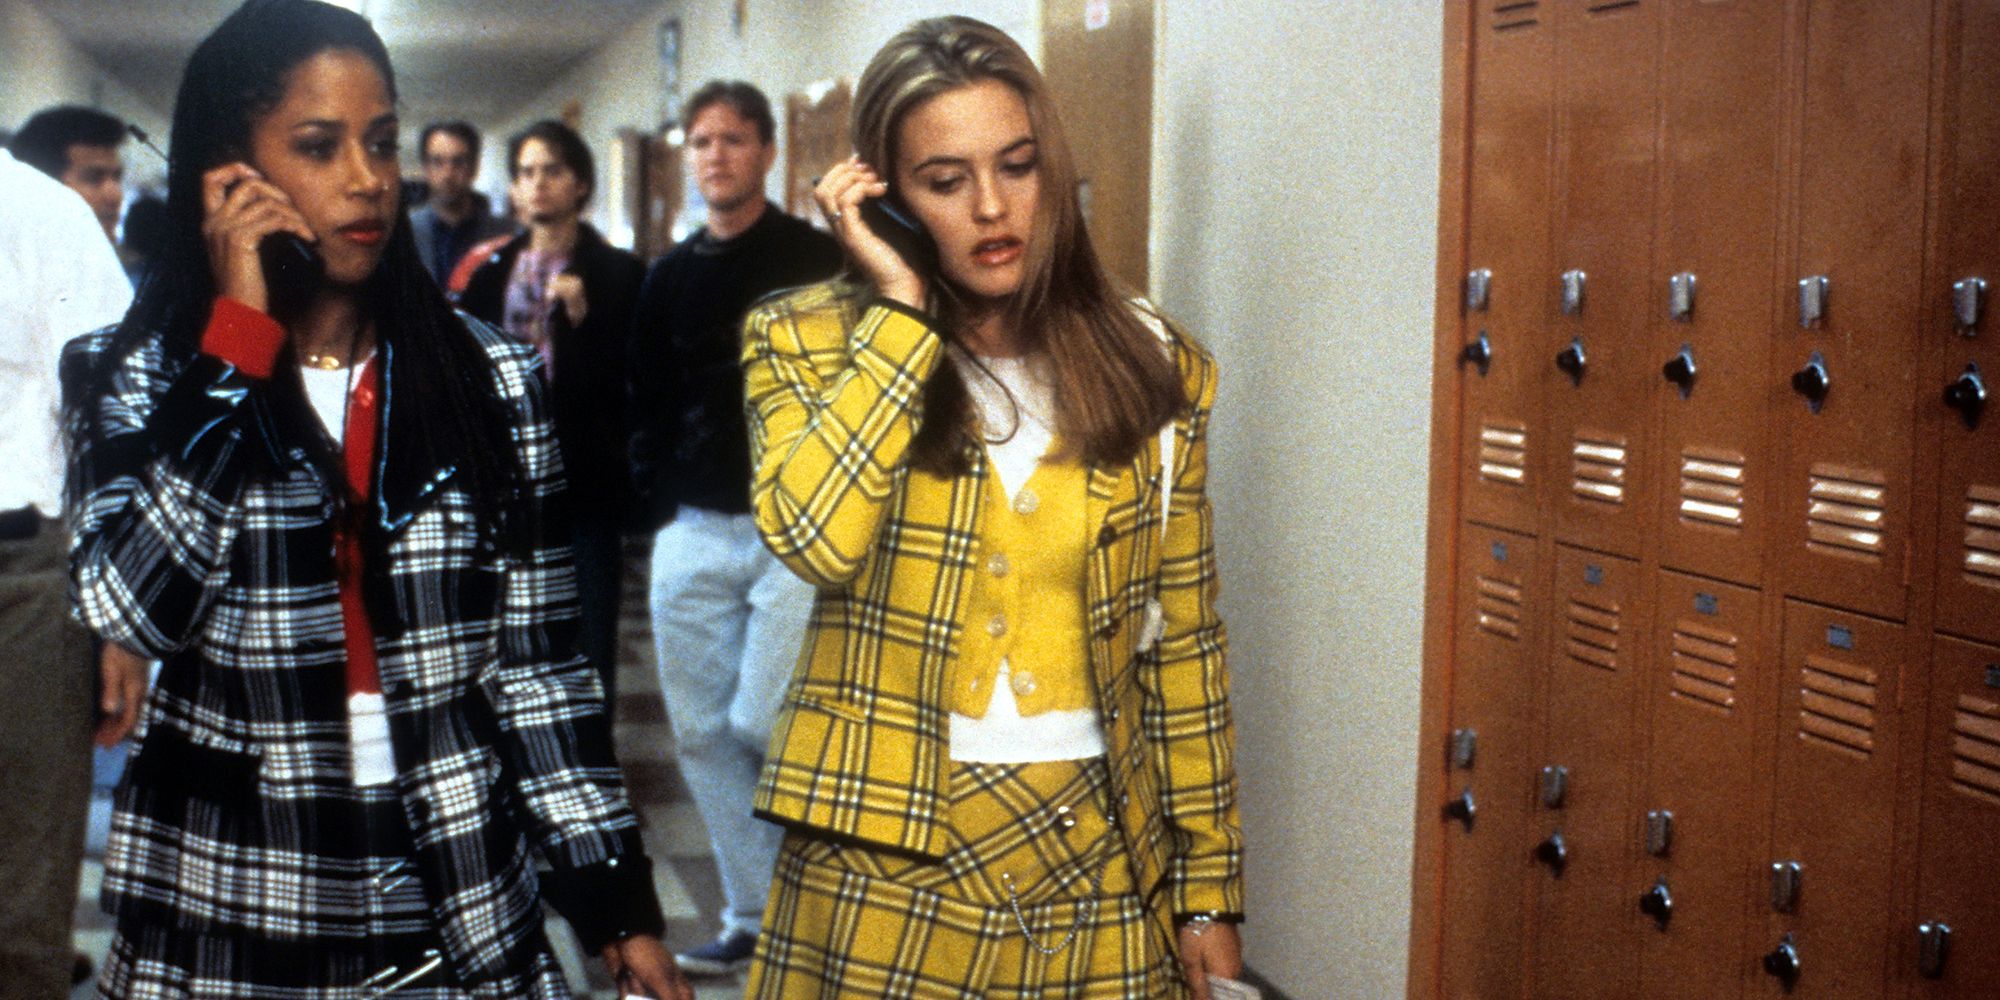 Most Iconic Chick Flick Outfits